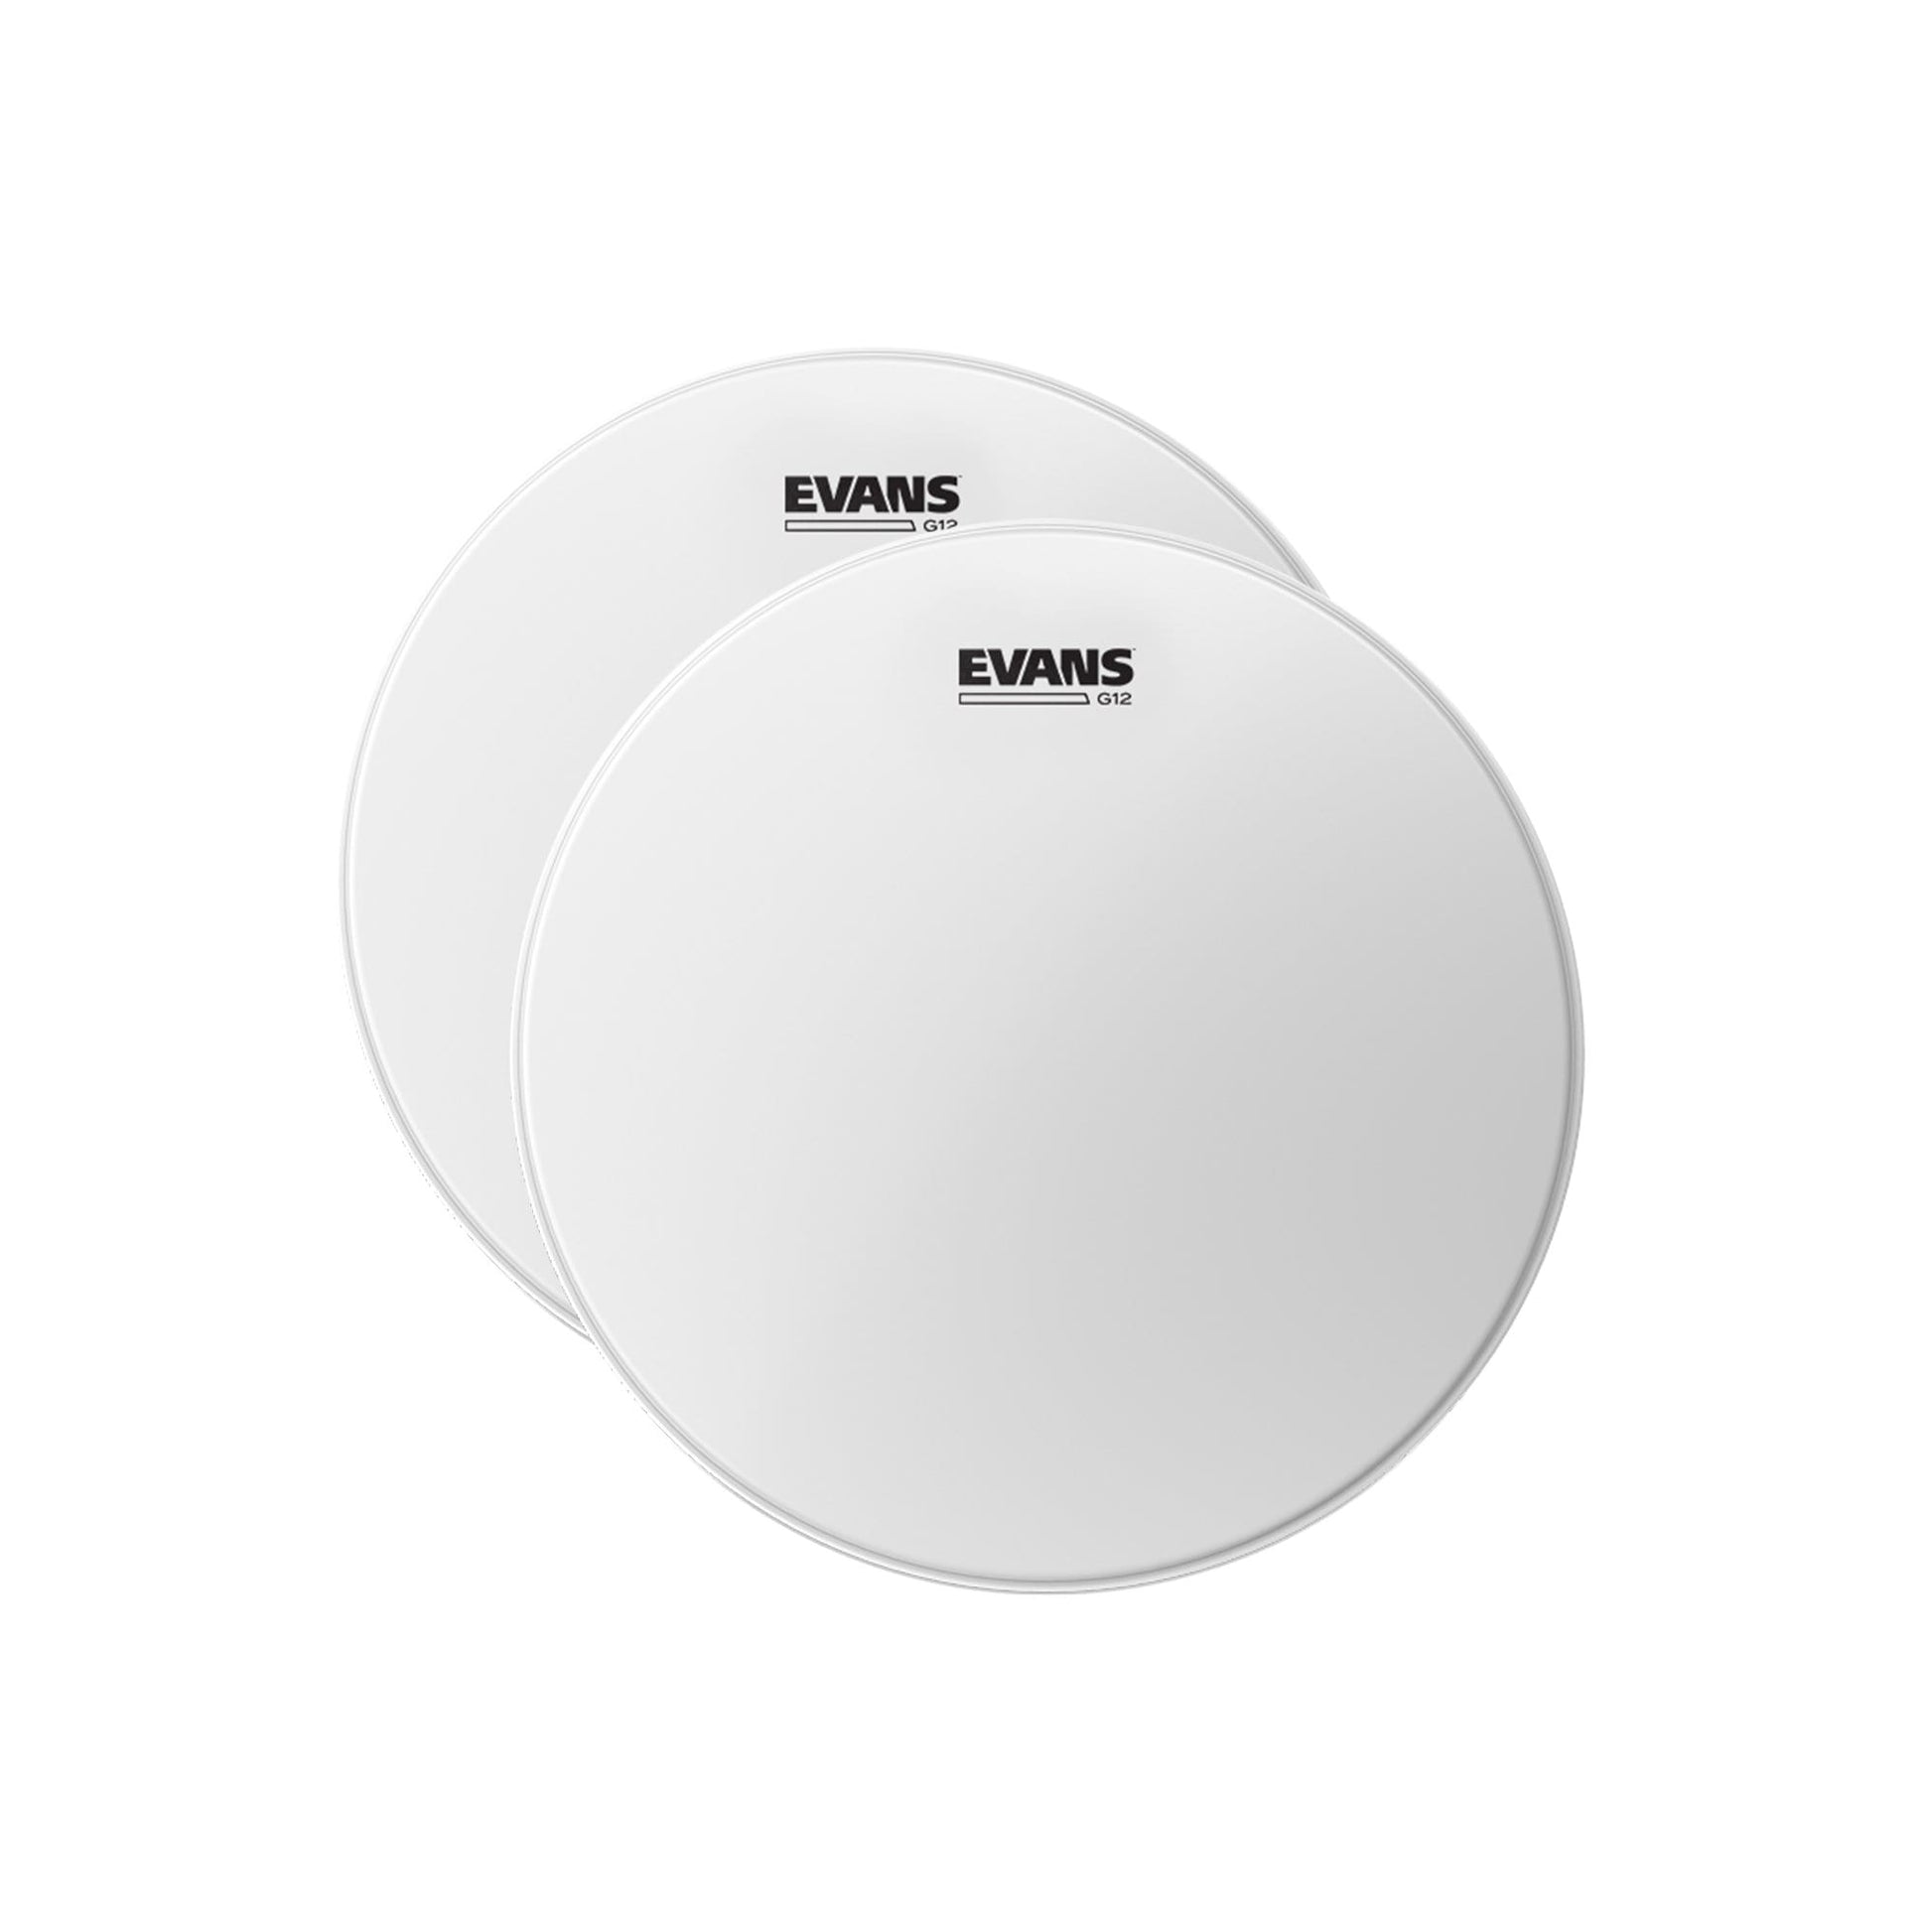 Evans 13" G12 Coated White Drum Head (2 Pack Bundle) Drums and Percussion / Parts and Accessories / Heads